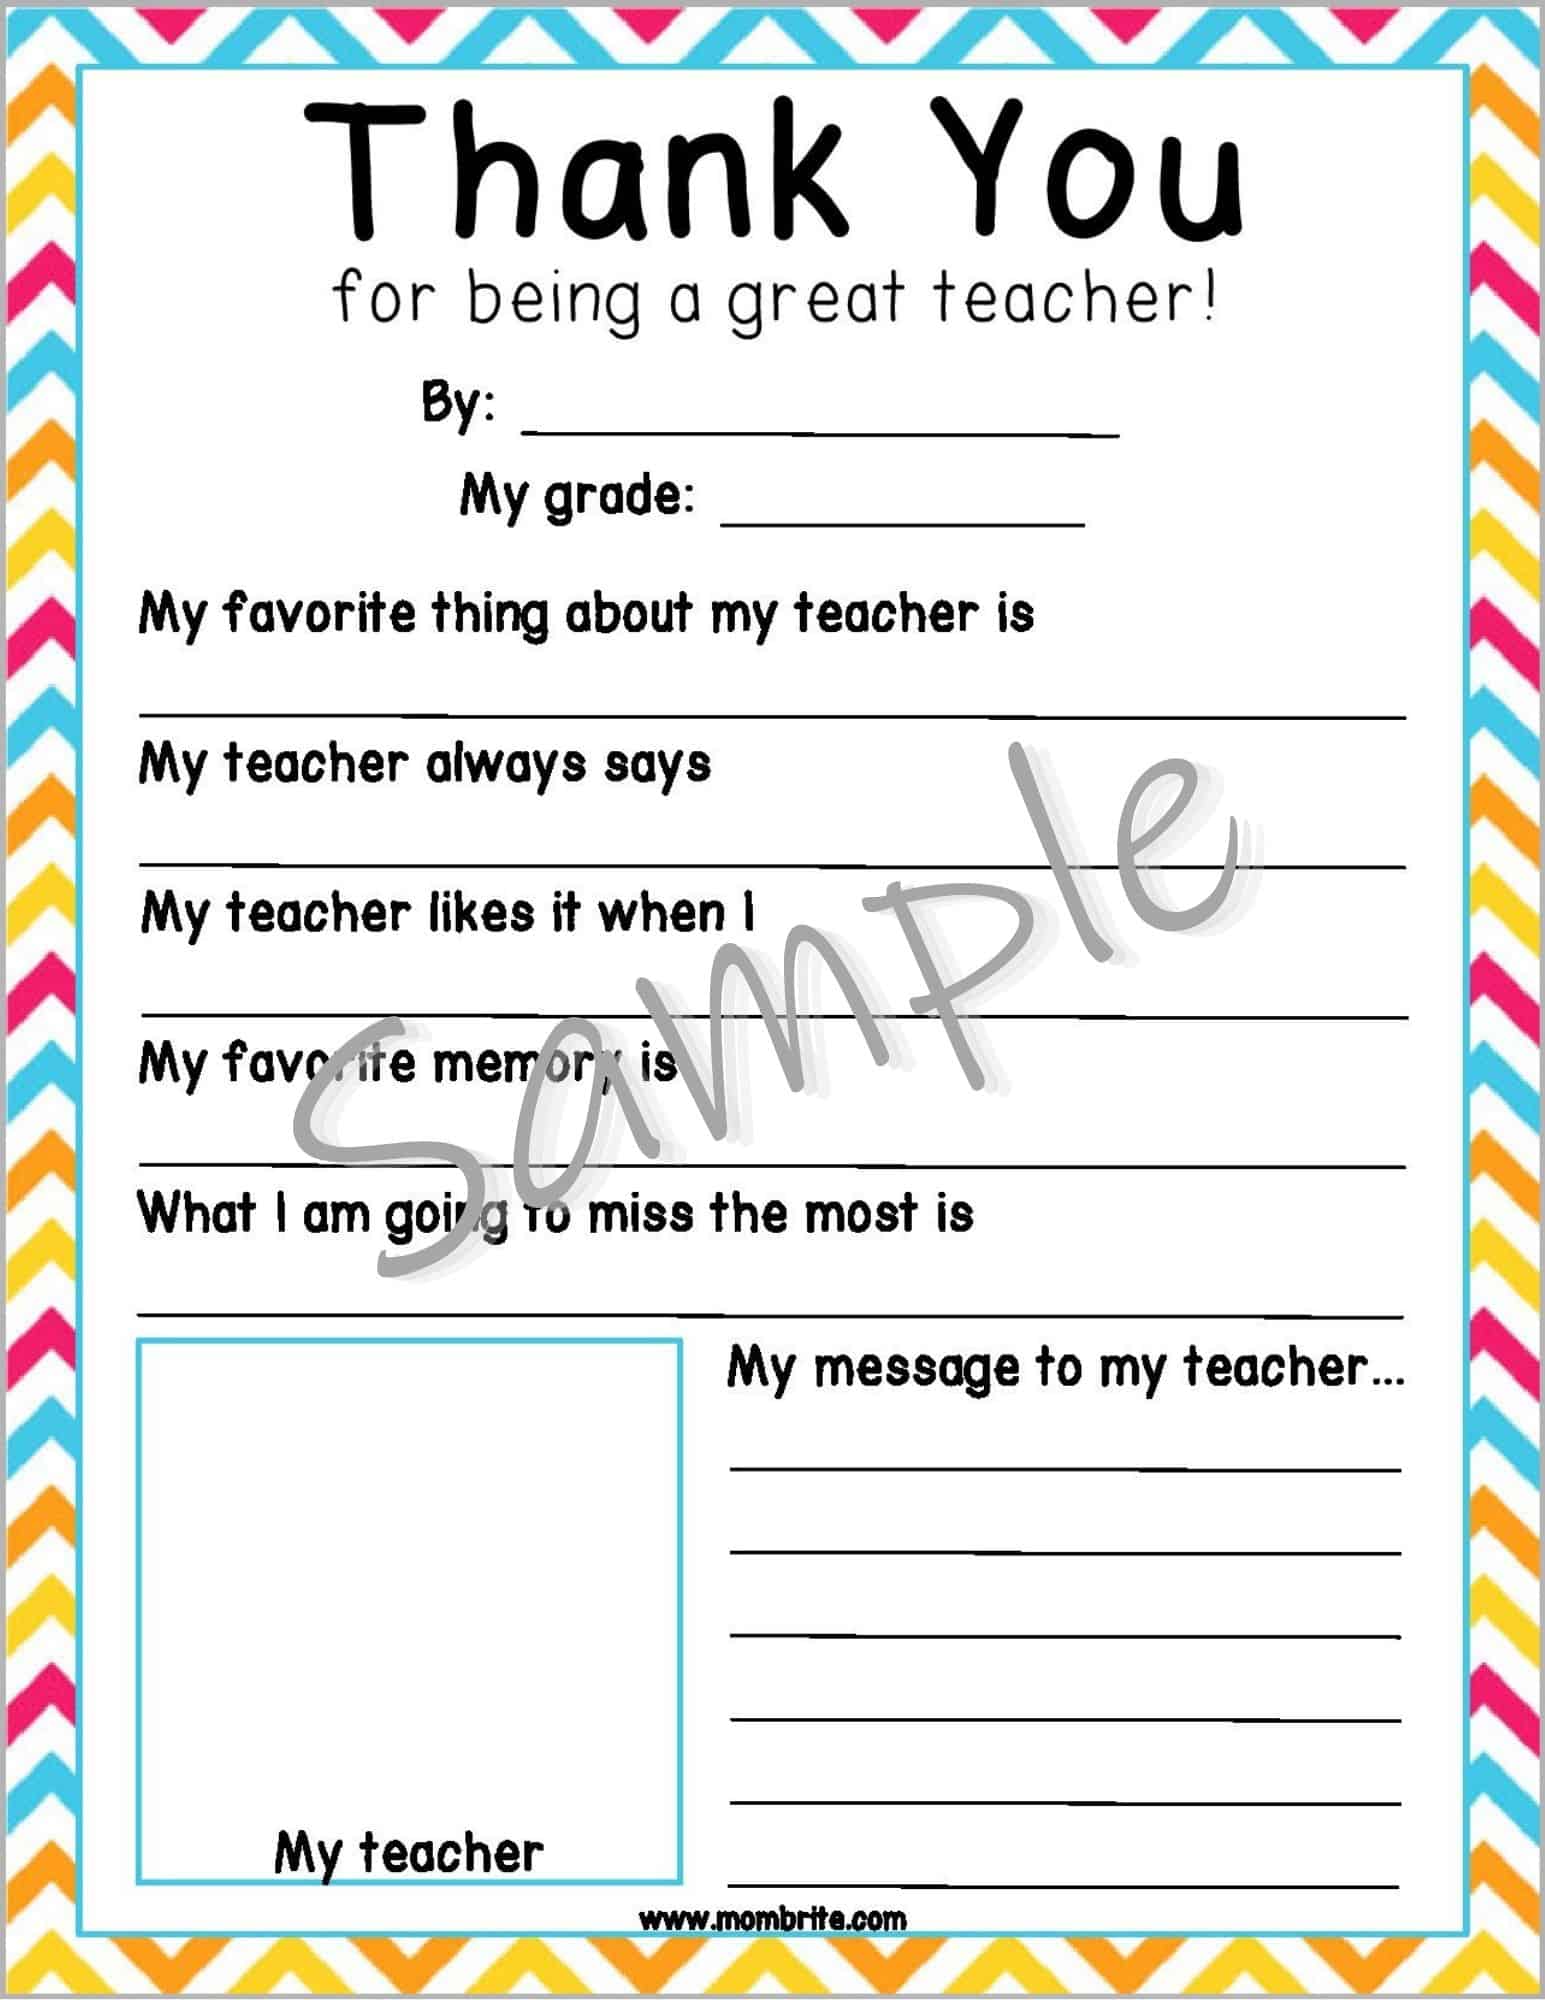 Free Thank You for Being a Great Teacher Printable Mombrite